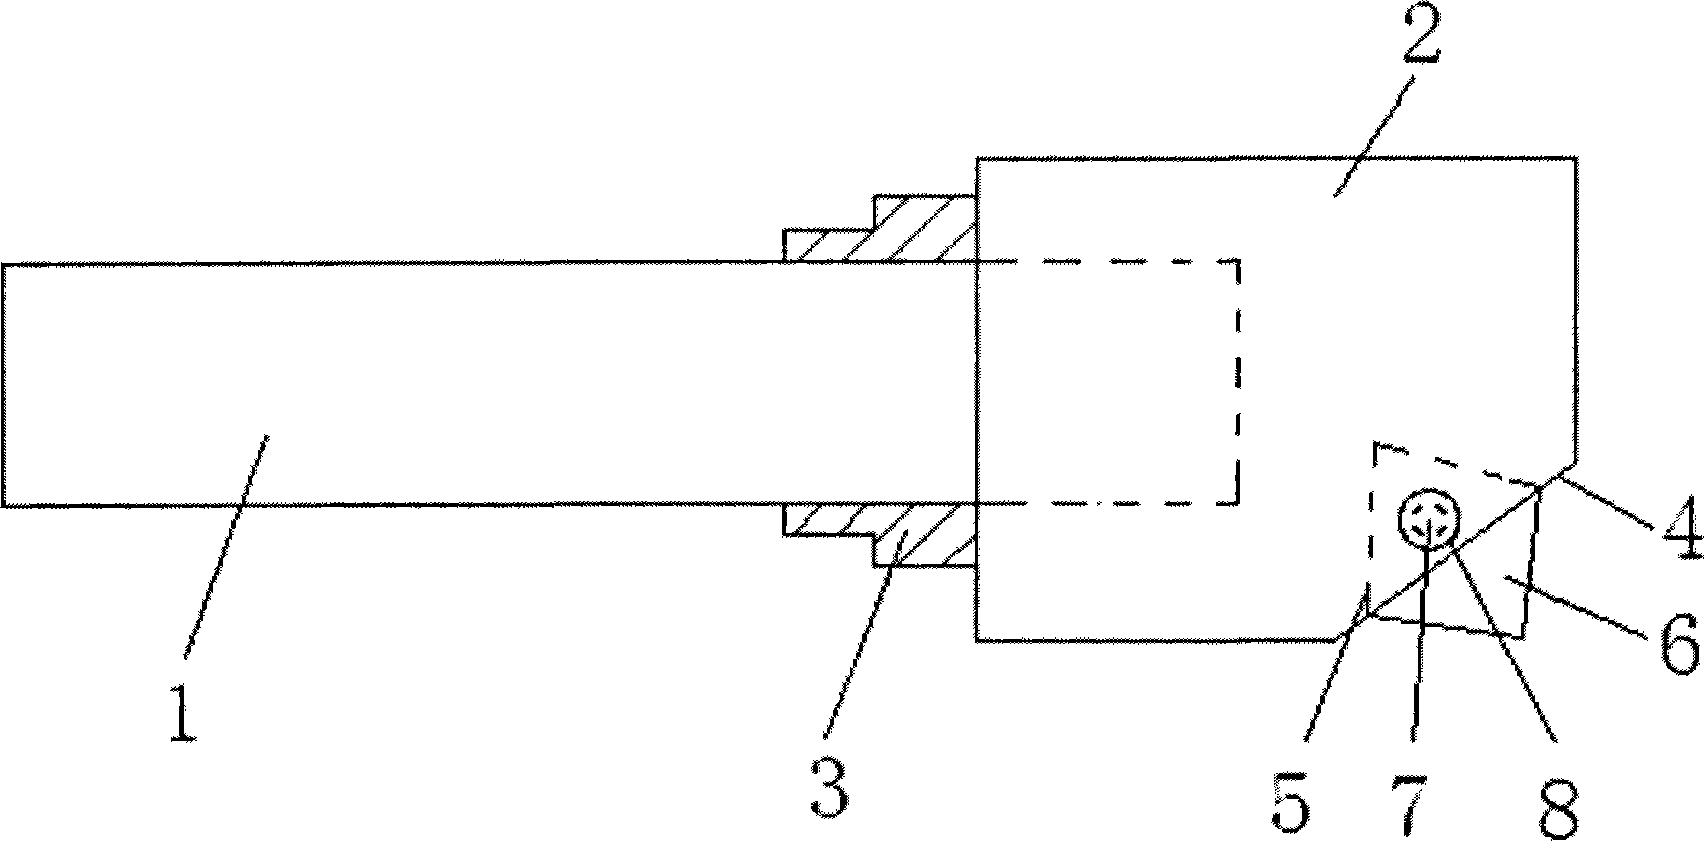 Structure for mounting boring cutter in embedding manner